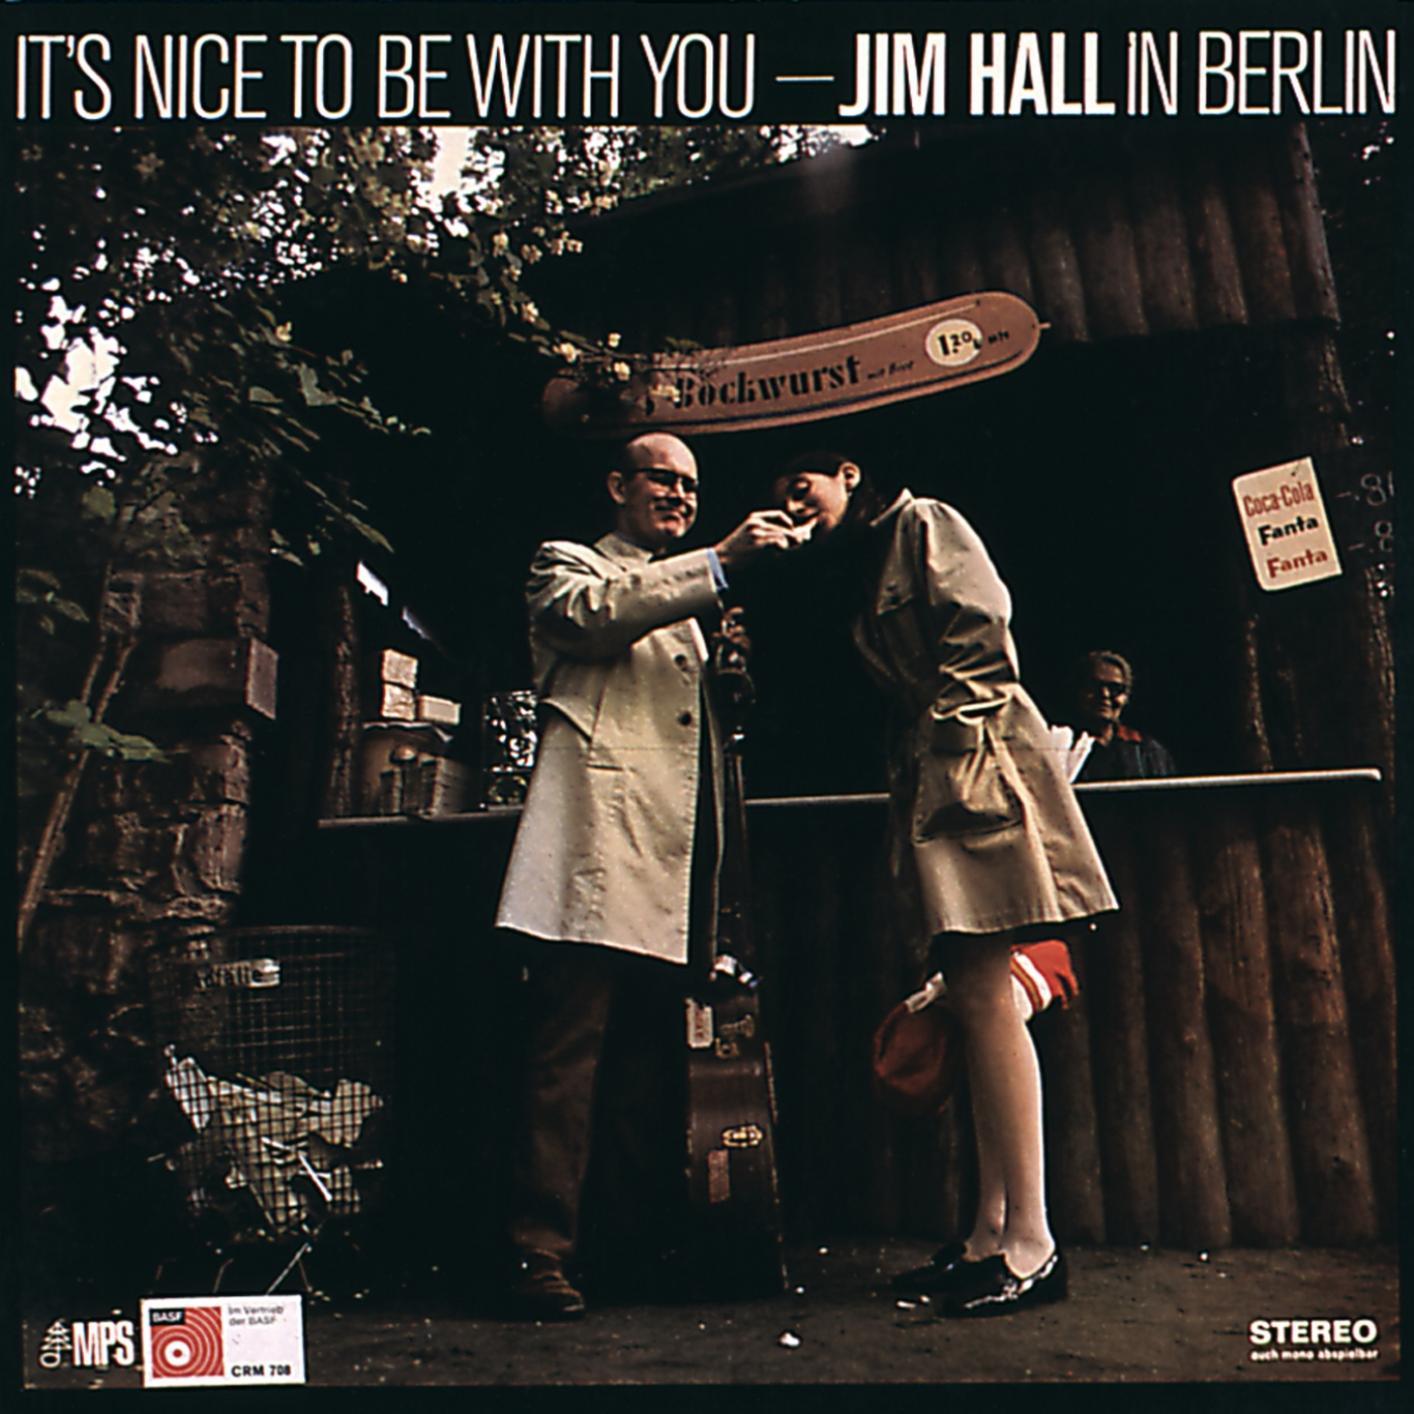 Jim Hall – It’s Nice To Be With You: Jim Hall In Berlin (1969/2015) [HighResAudio FLAC 24bit/88,2kHz]